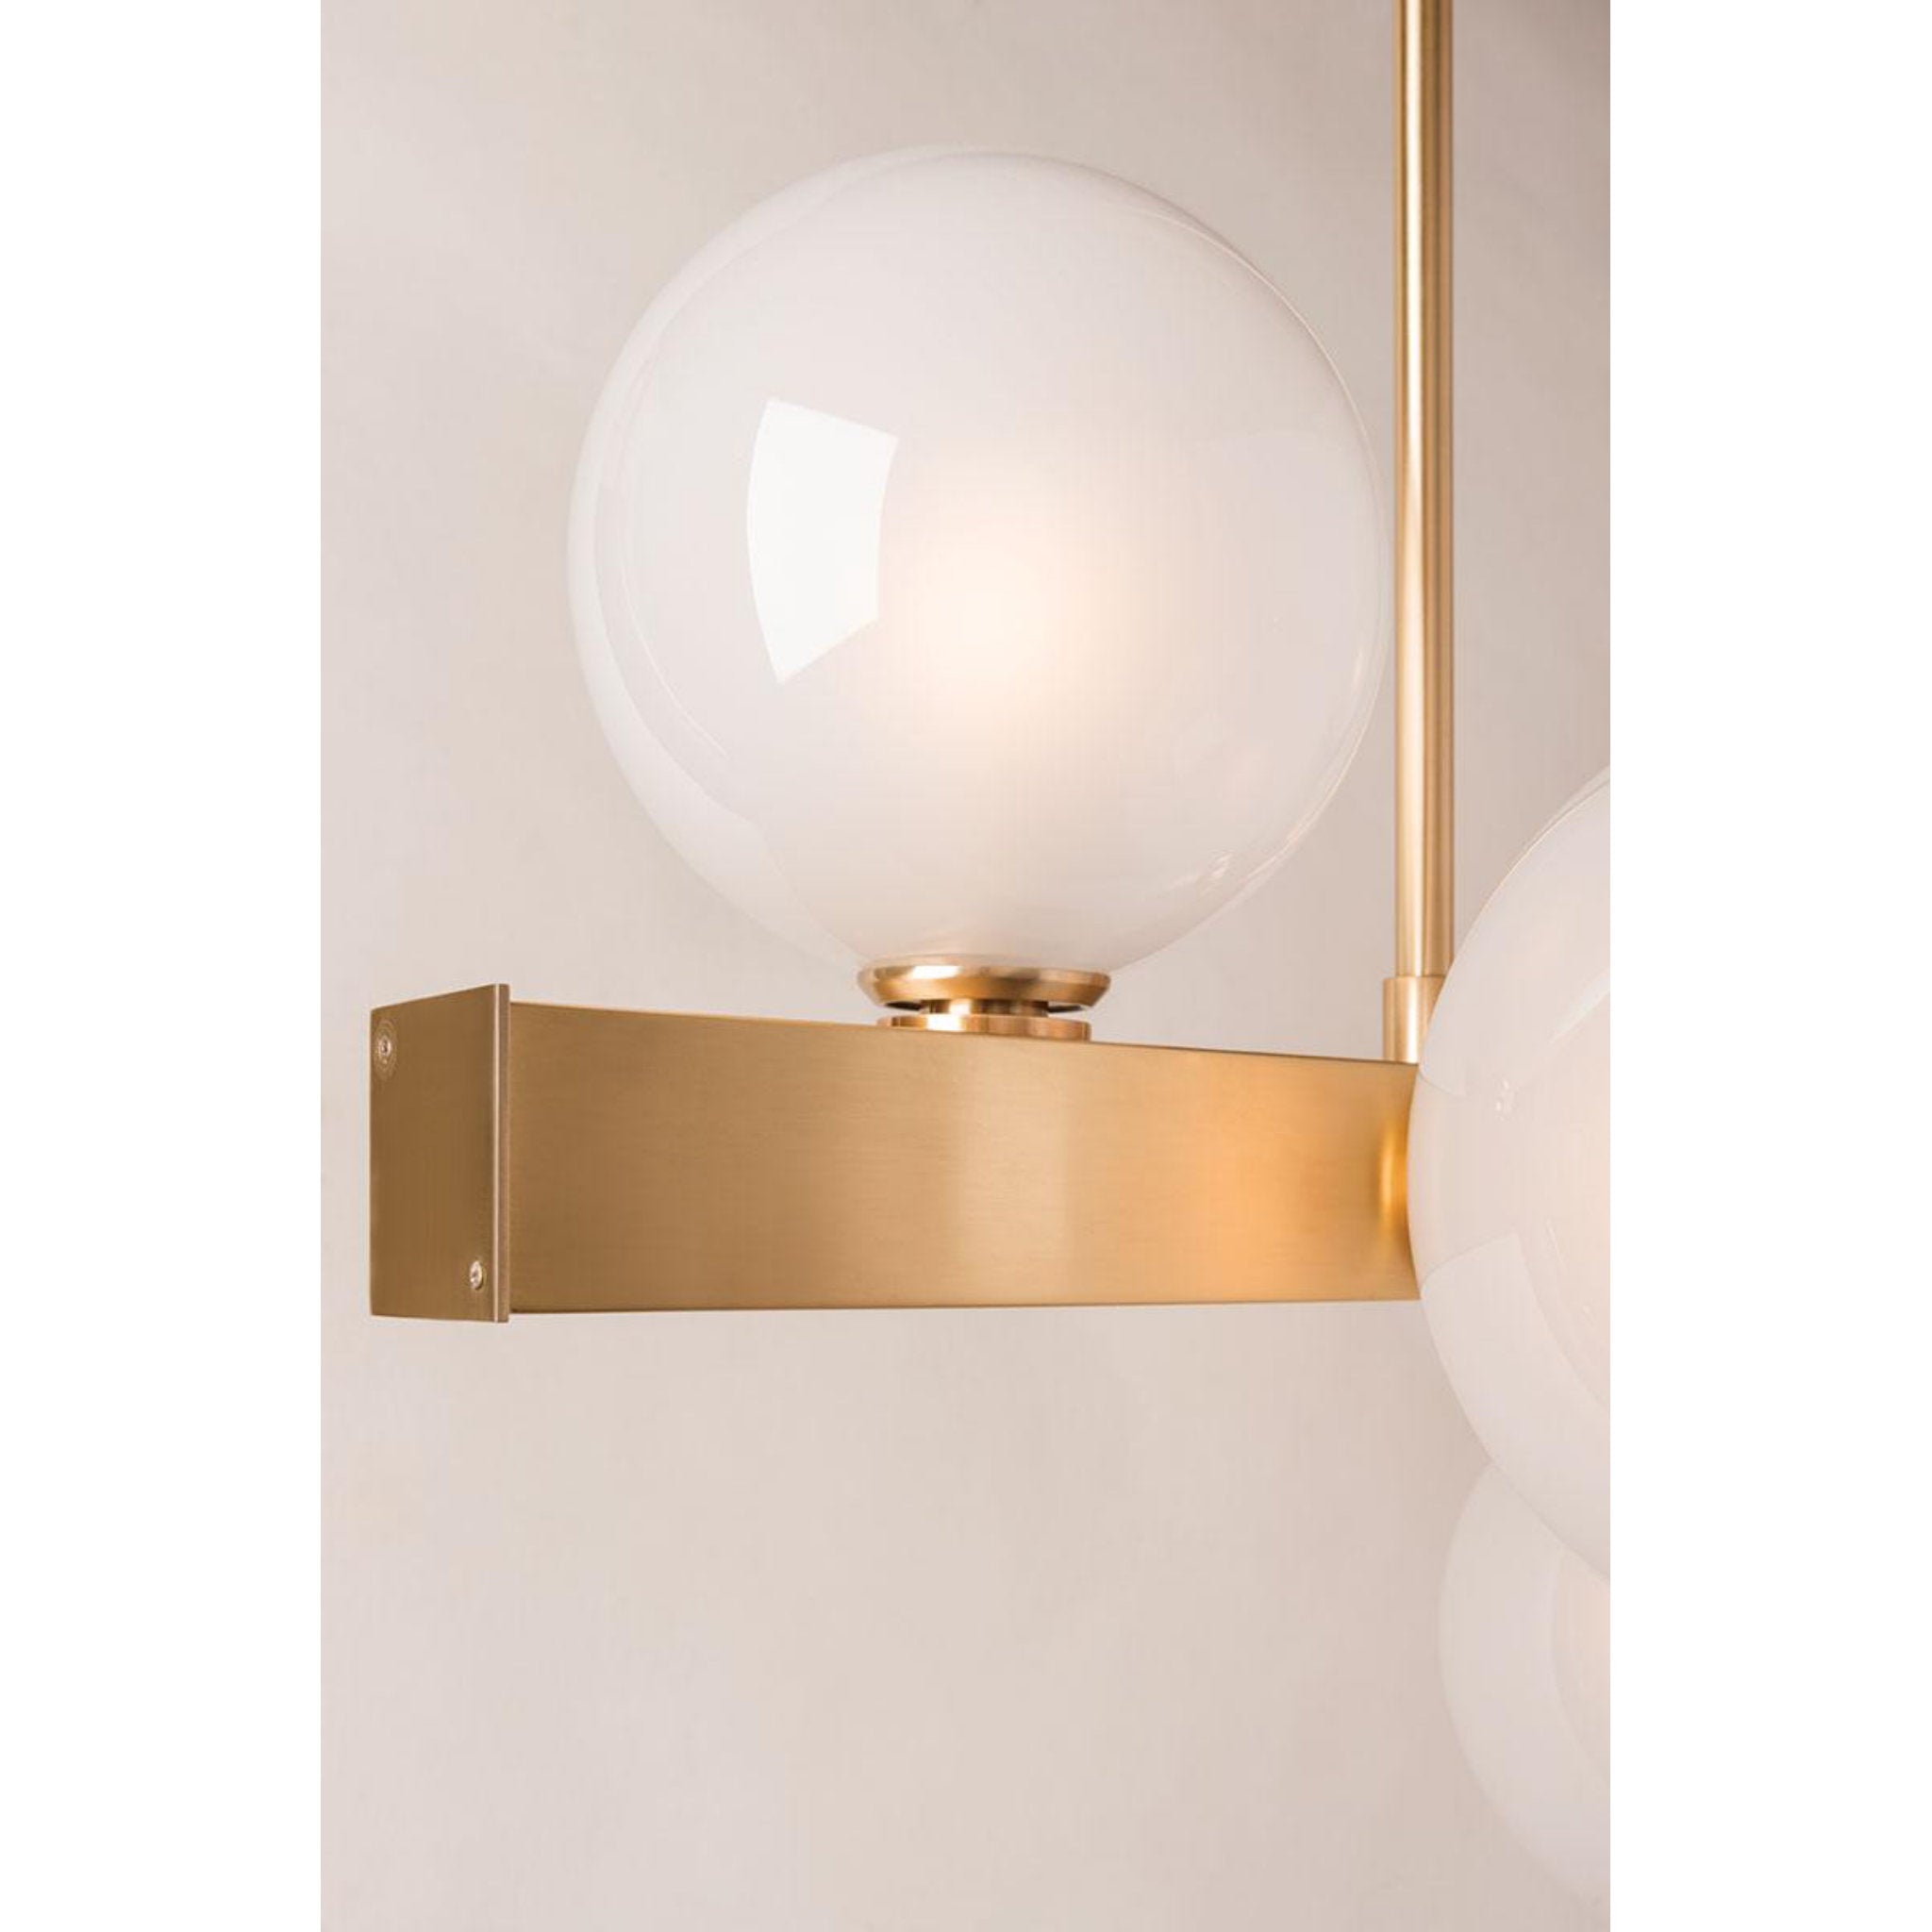 Hinsdale 4 Light Pendant in Aged Brass